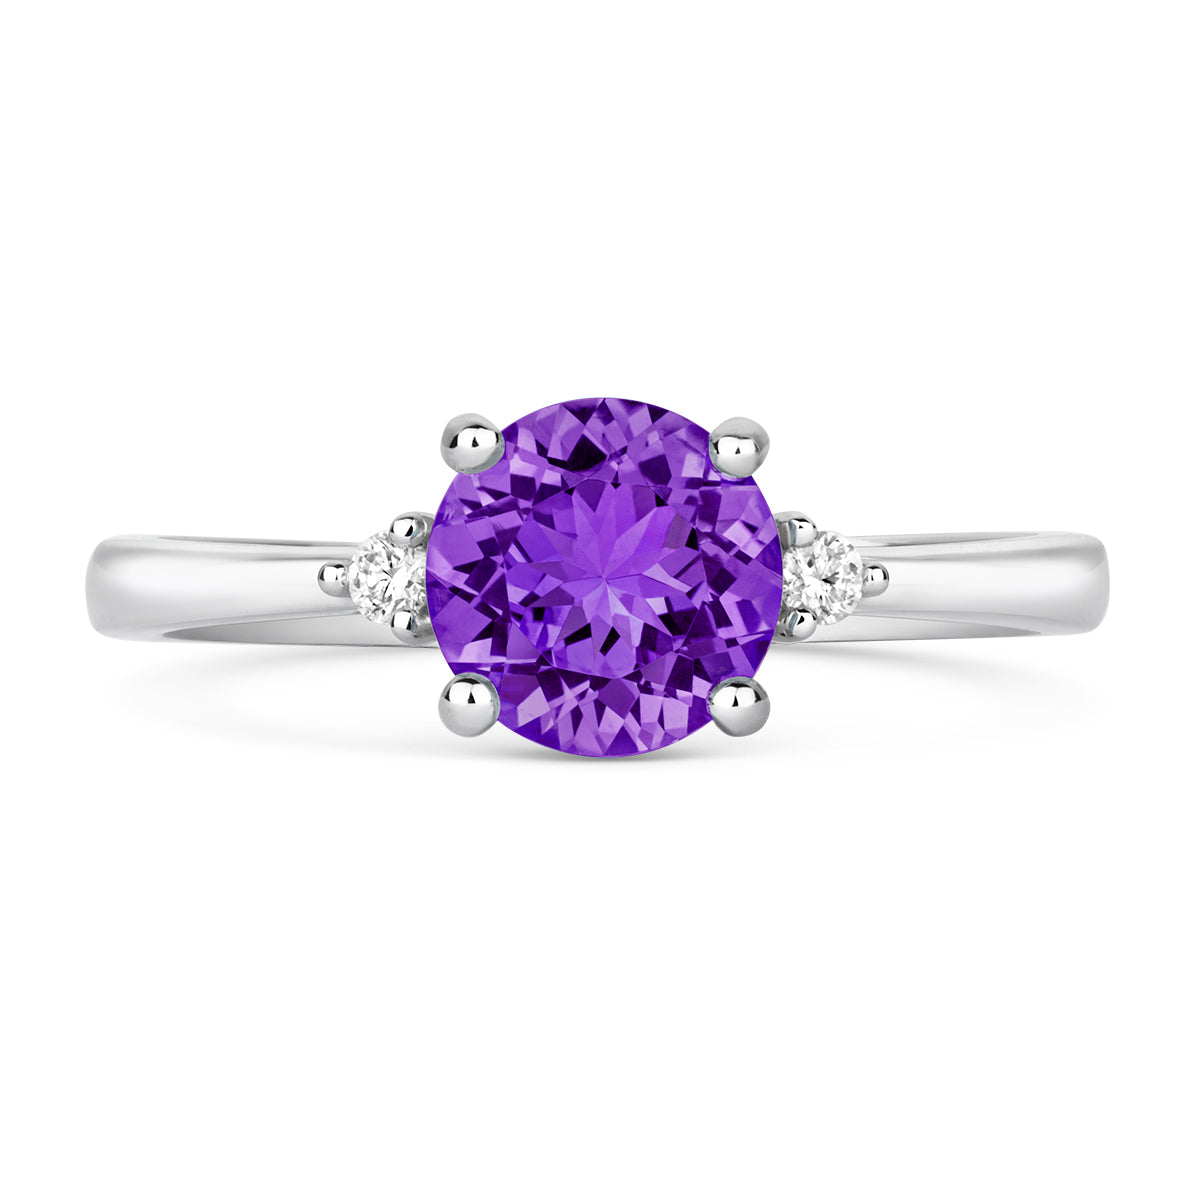 18ct White Gold Amethyst and Diamond 3 stone ring